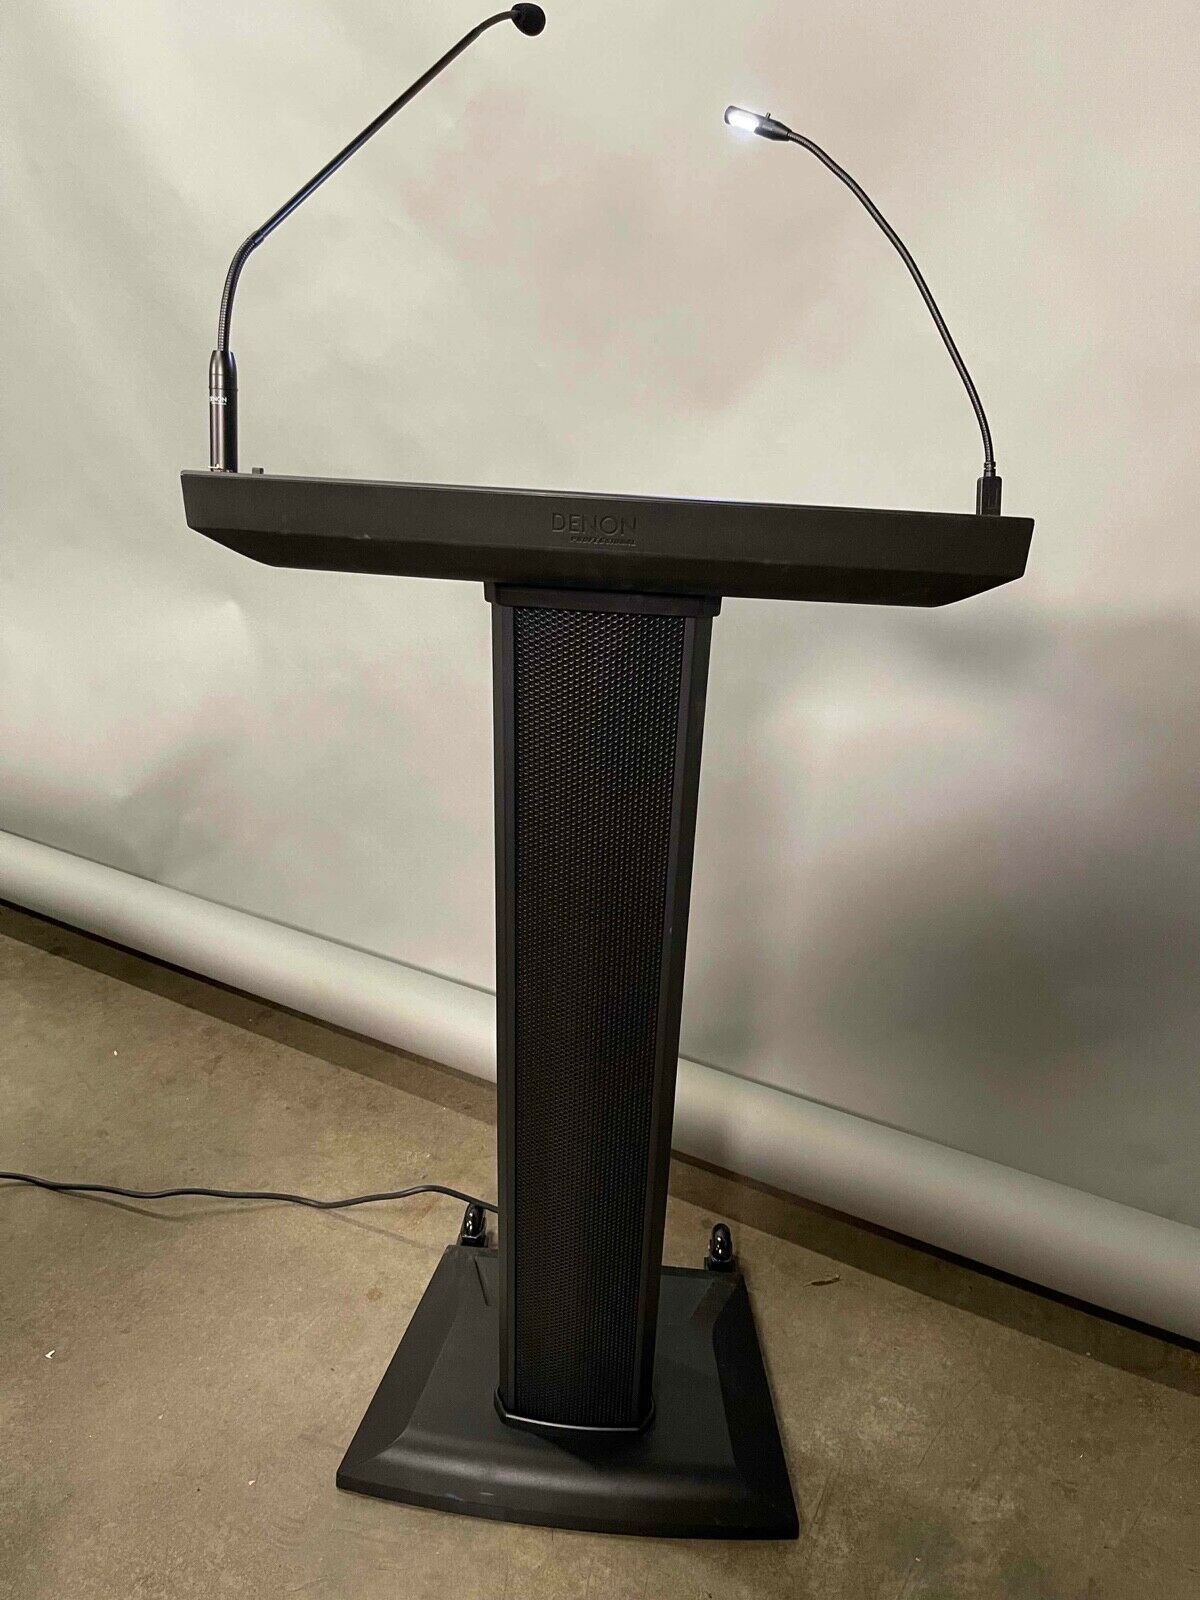 Denon Professional Lectern With Active Speaker Array- Black